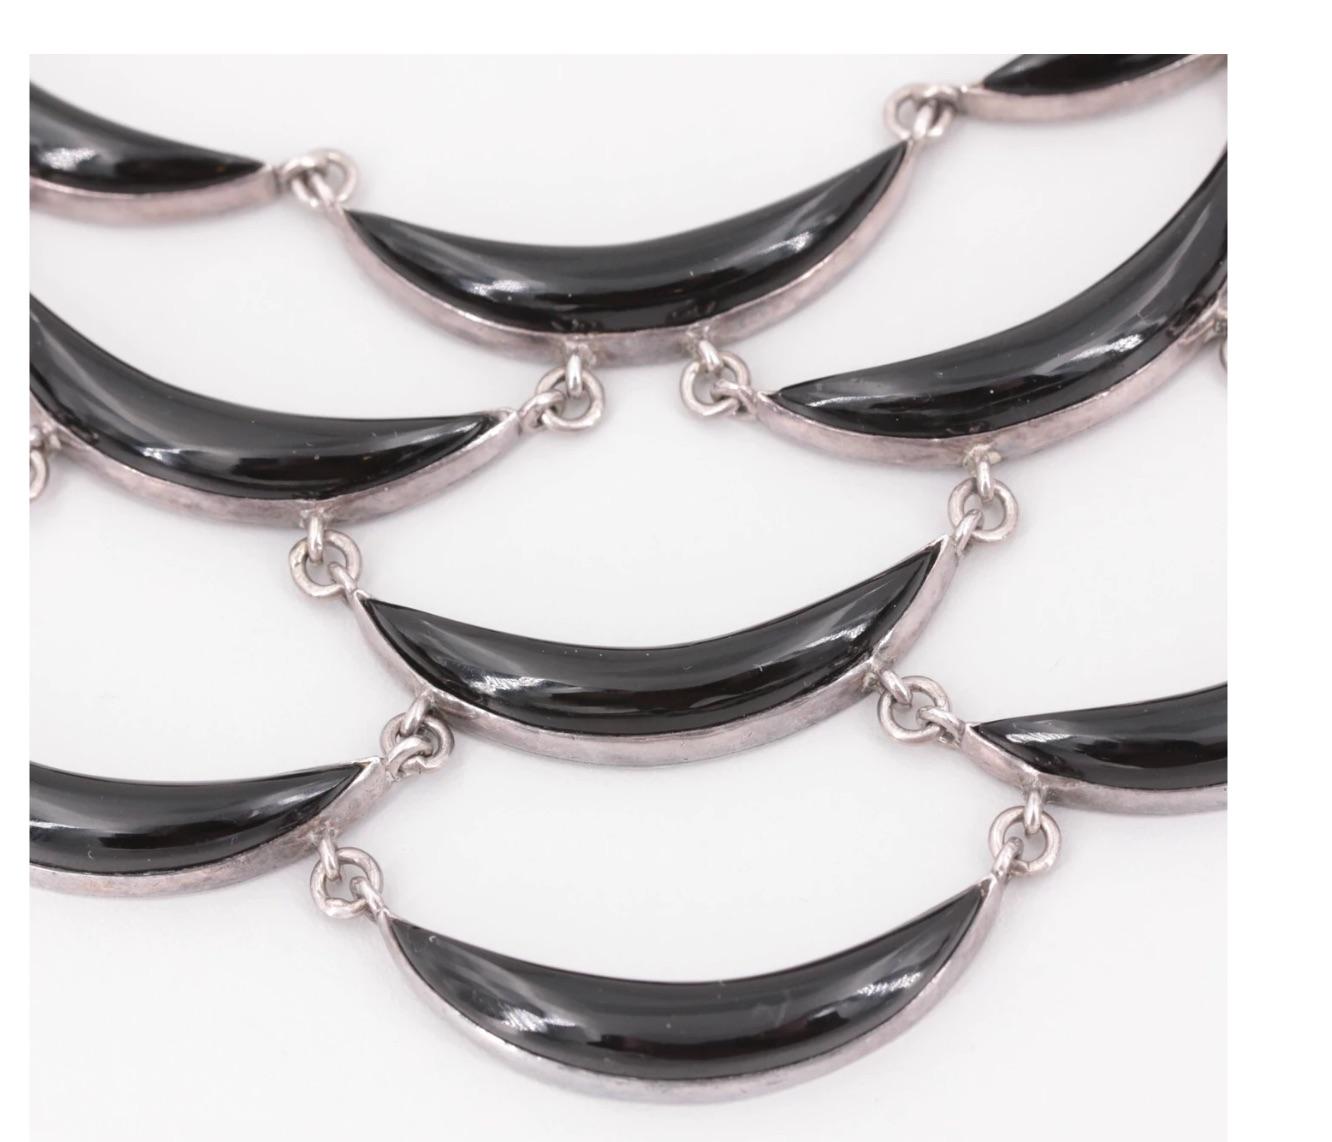 This Modernist vintage signed and Hallmarked Museum Collectible Sterling Silver and obsidian Crescent Collar necklace and dangle earrings set are one of Antonio Pineda's iconic designs from the 1950's! 

Fabricated of 970 sterling silver, it